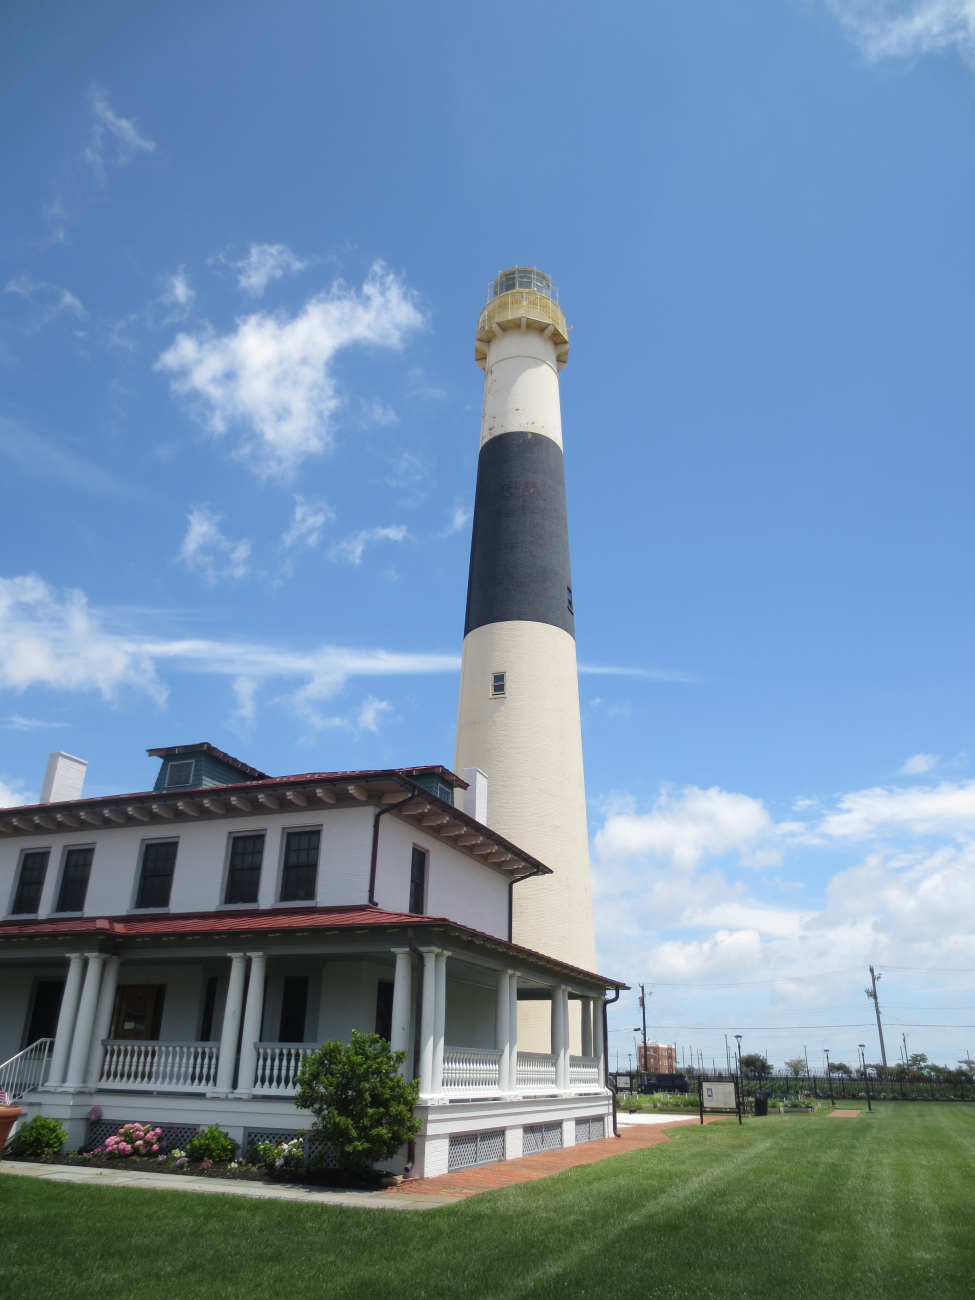 Absecon Lighthouse and keeper's home